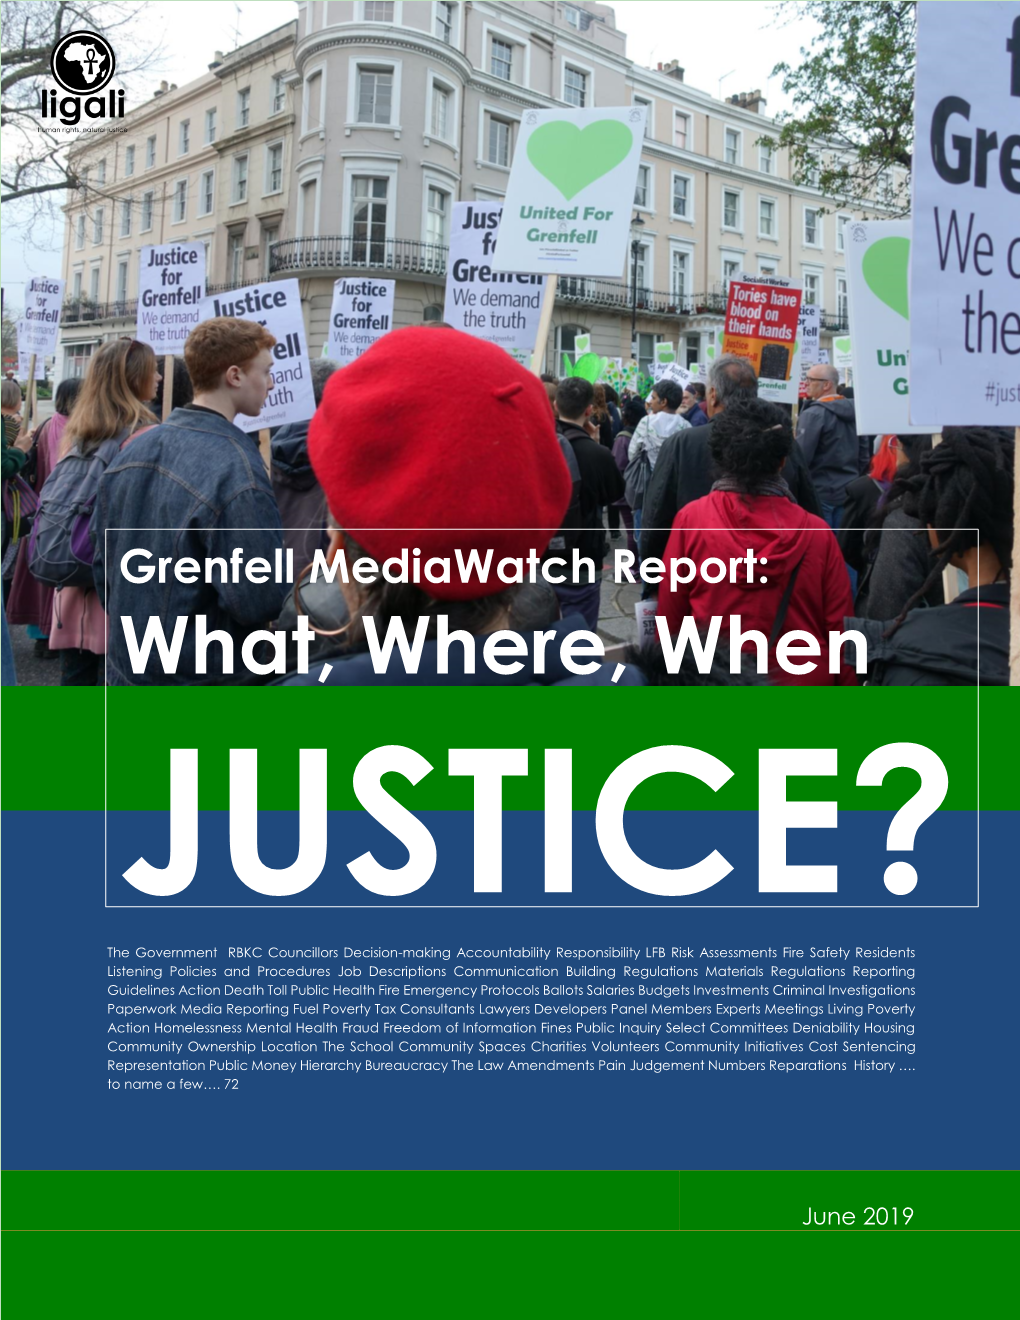 Grenfell Mediawatch Report: What, Where, When Justice?